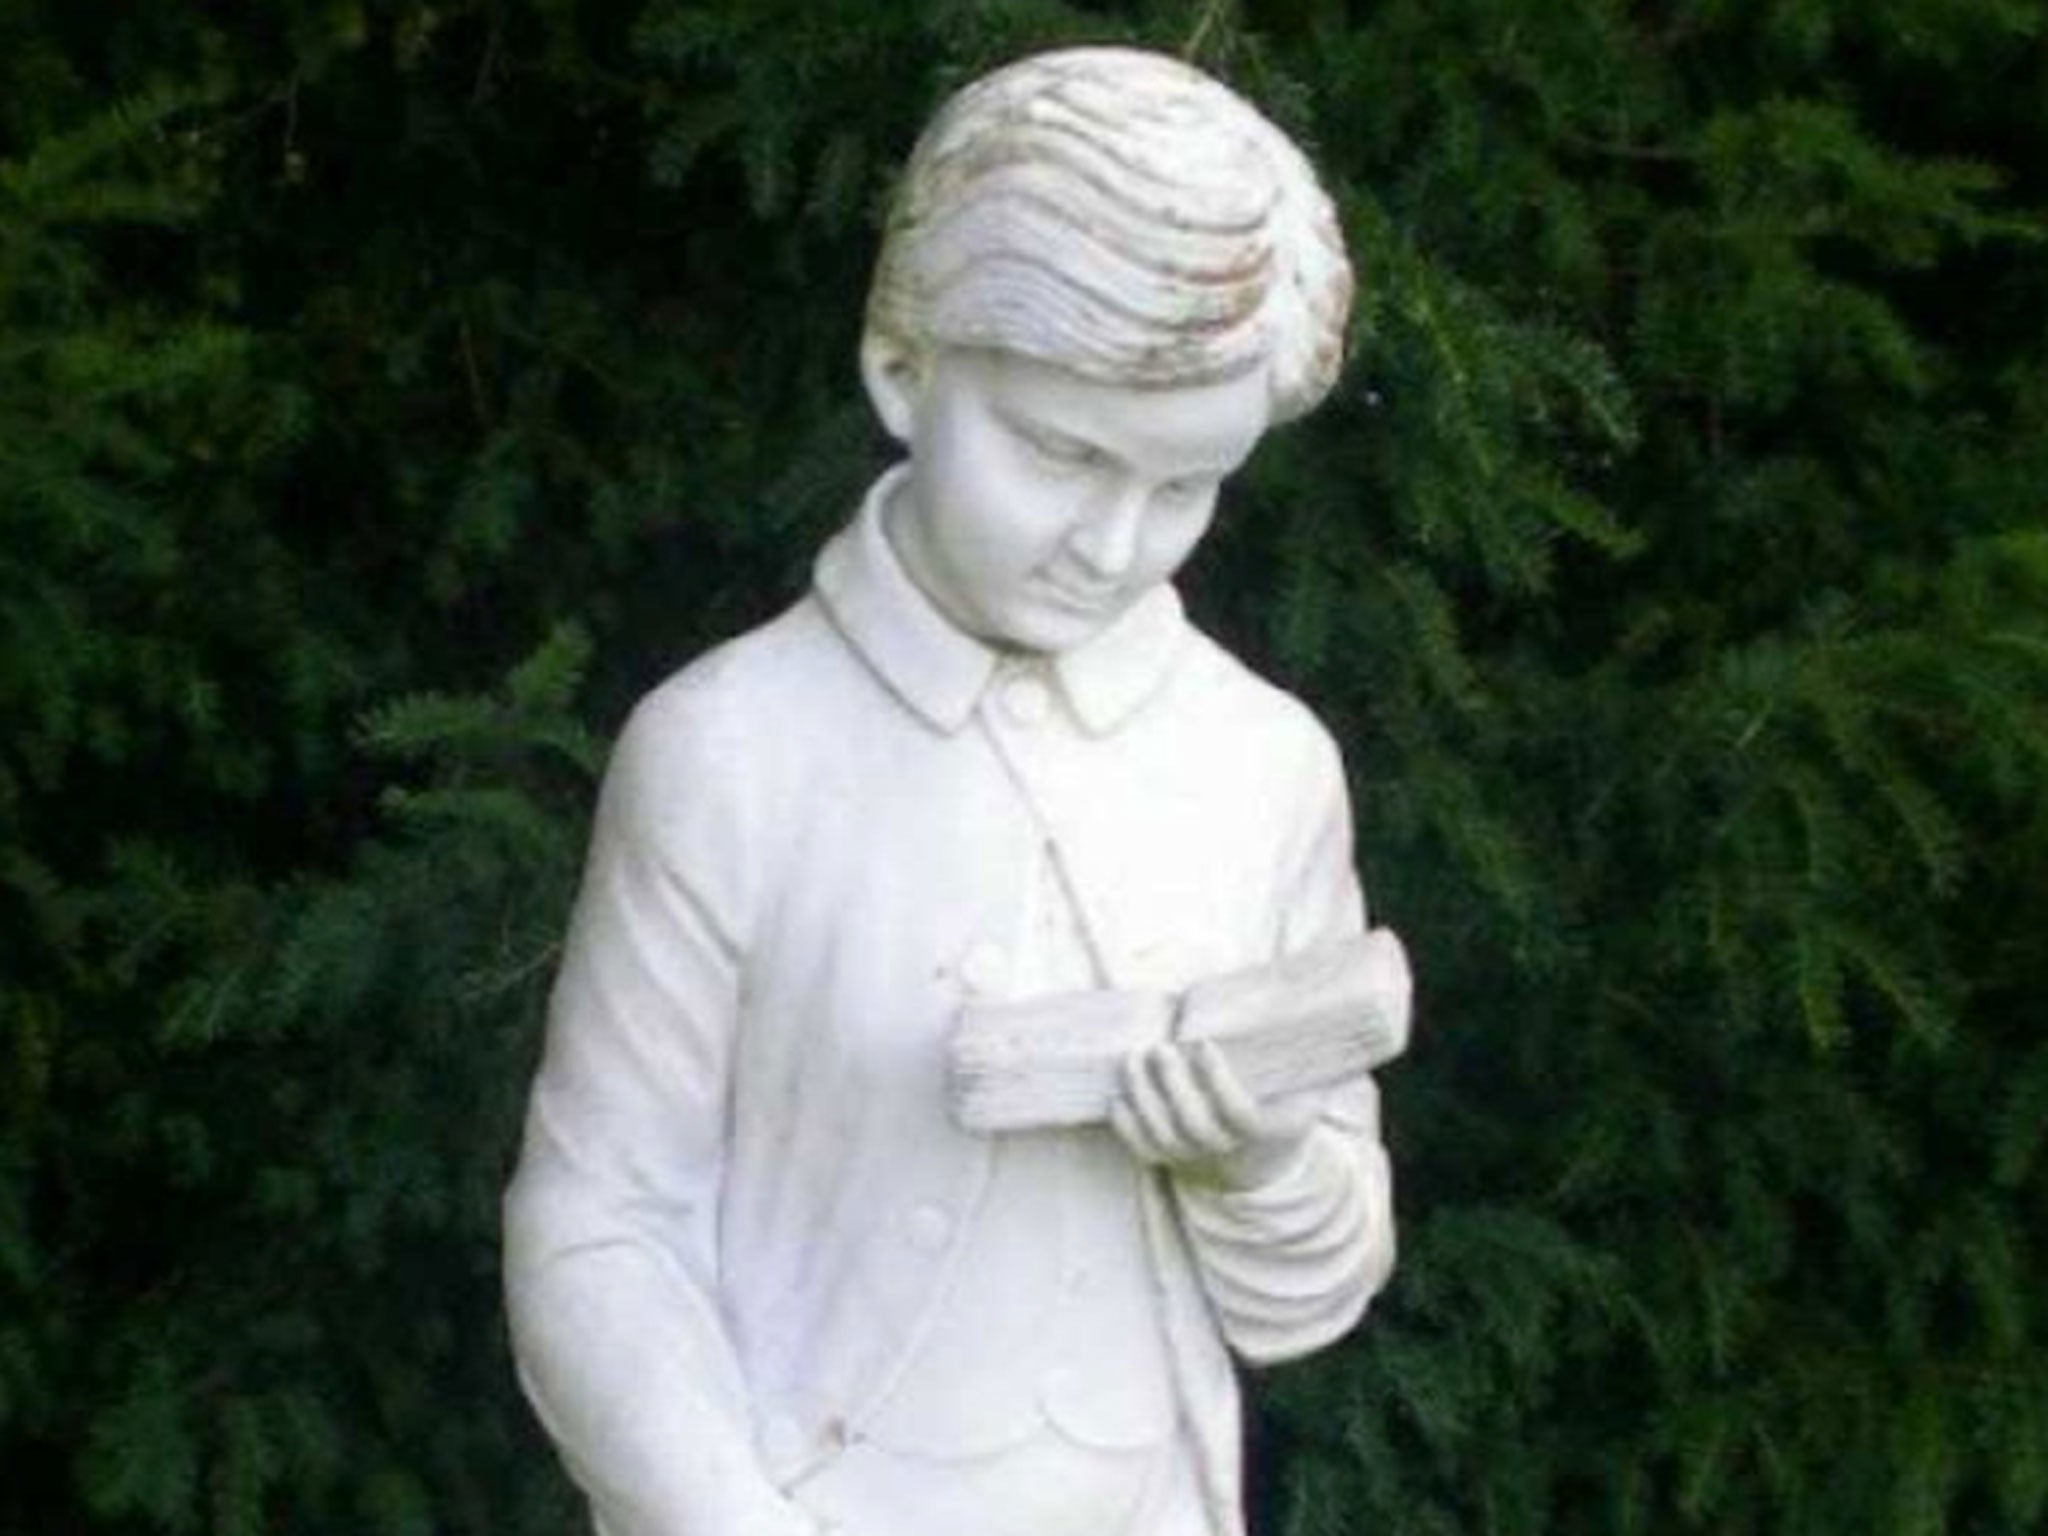 The statue of Lord Byron was stolen from Godmersham Park on 20 April